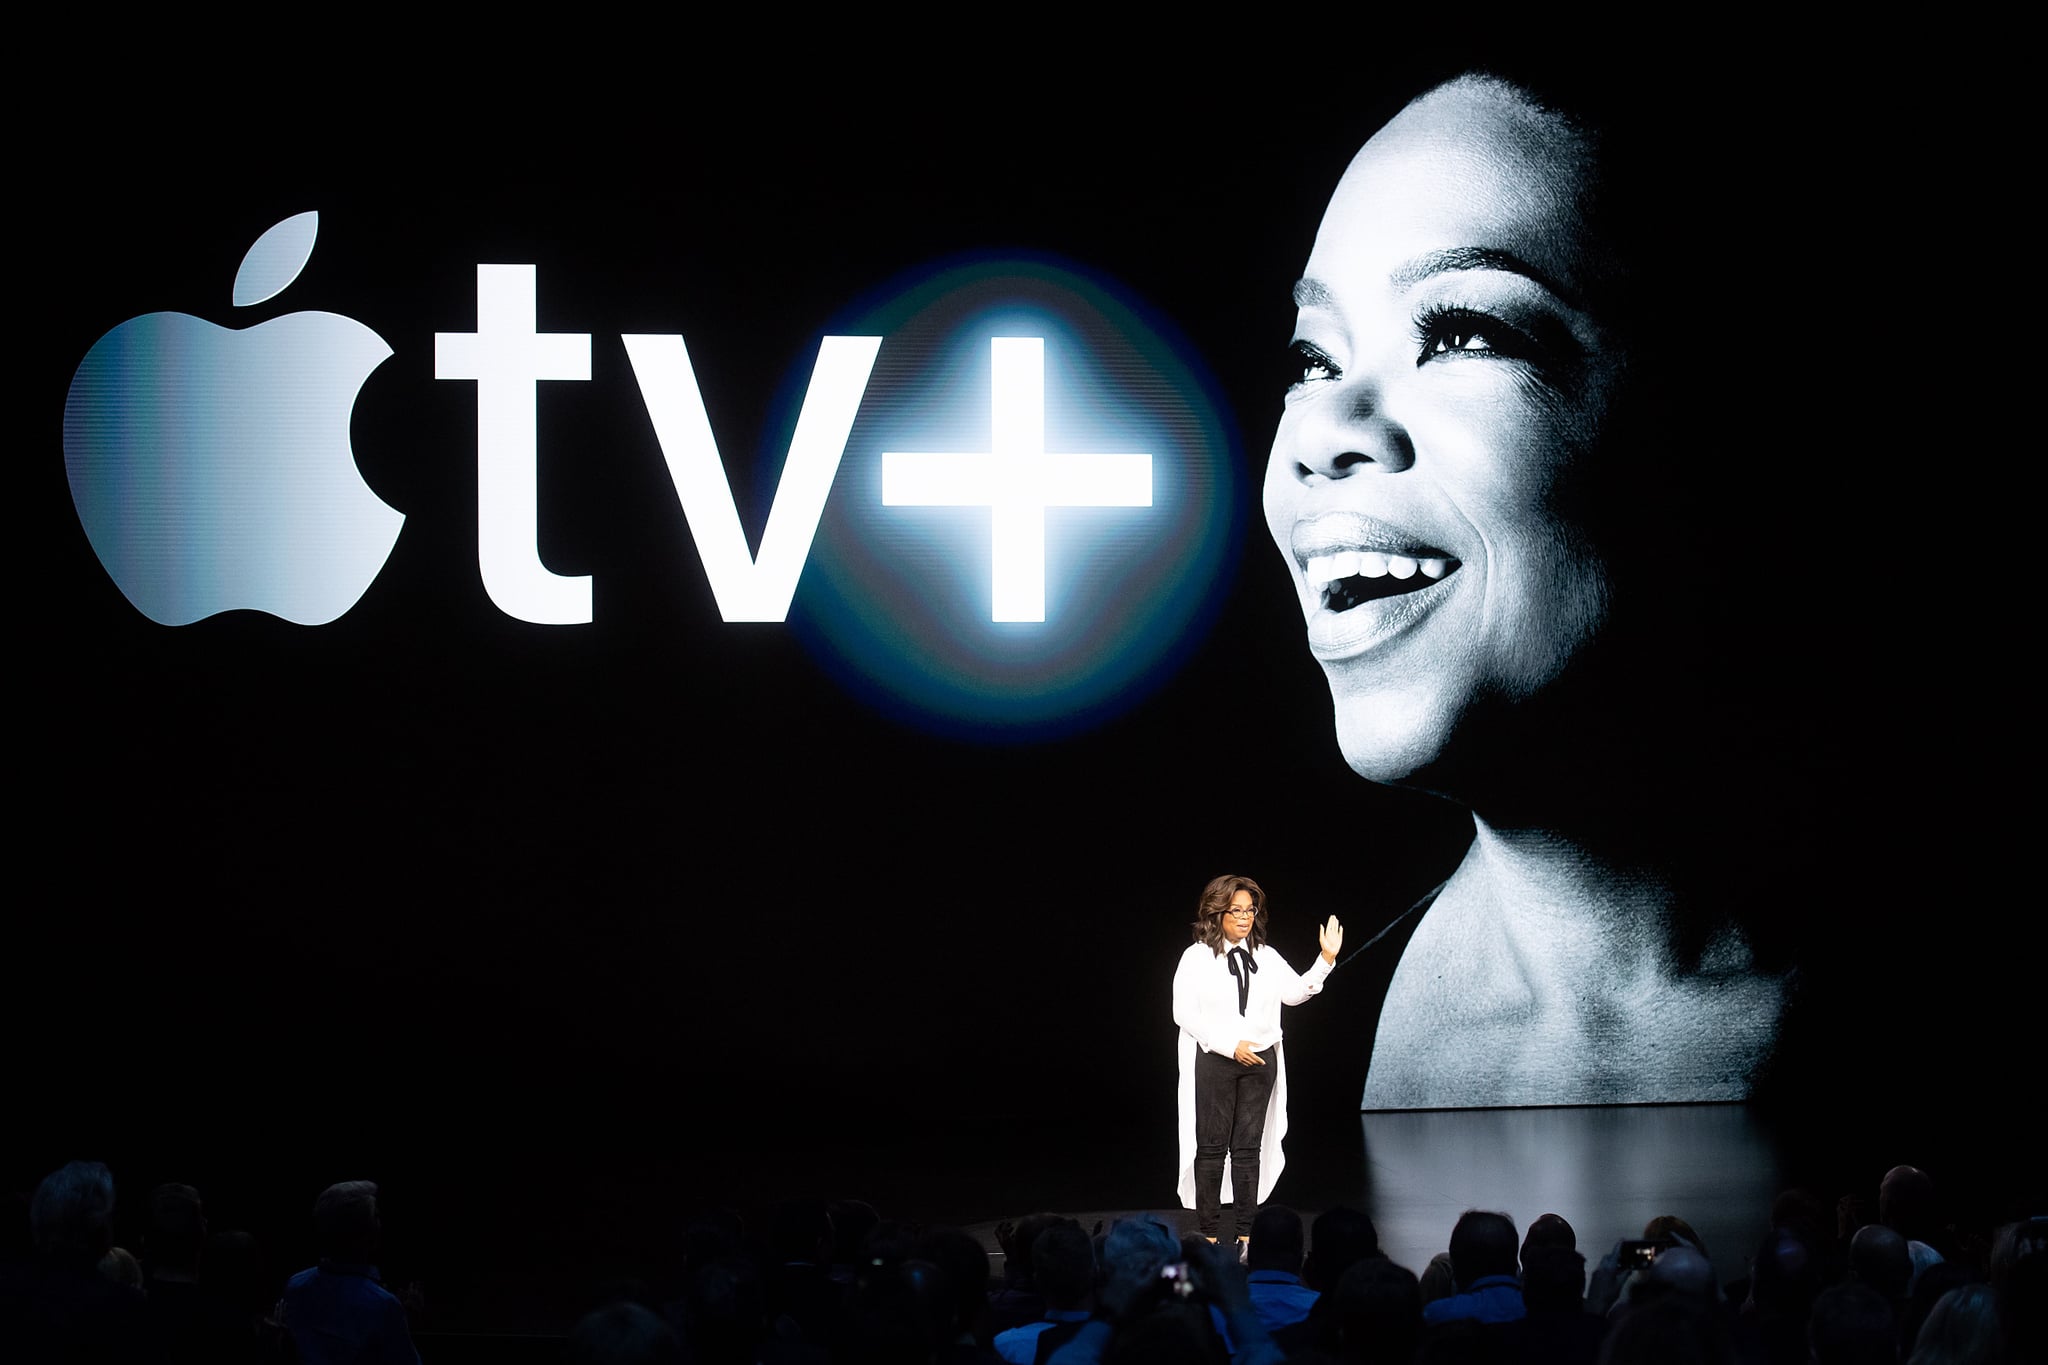 Oprah Winfrey speaks during an event launching Apple tv+ at Apple headquarters on March 25, 2019, in Cupertino, California. (Photo by NOAH BERGER / AFP)        (Photo credit should read NOAH BERGER/AFP/Getty Images)